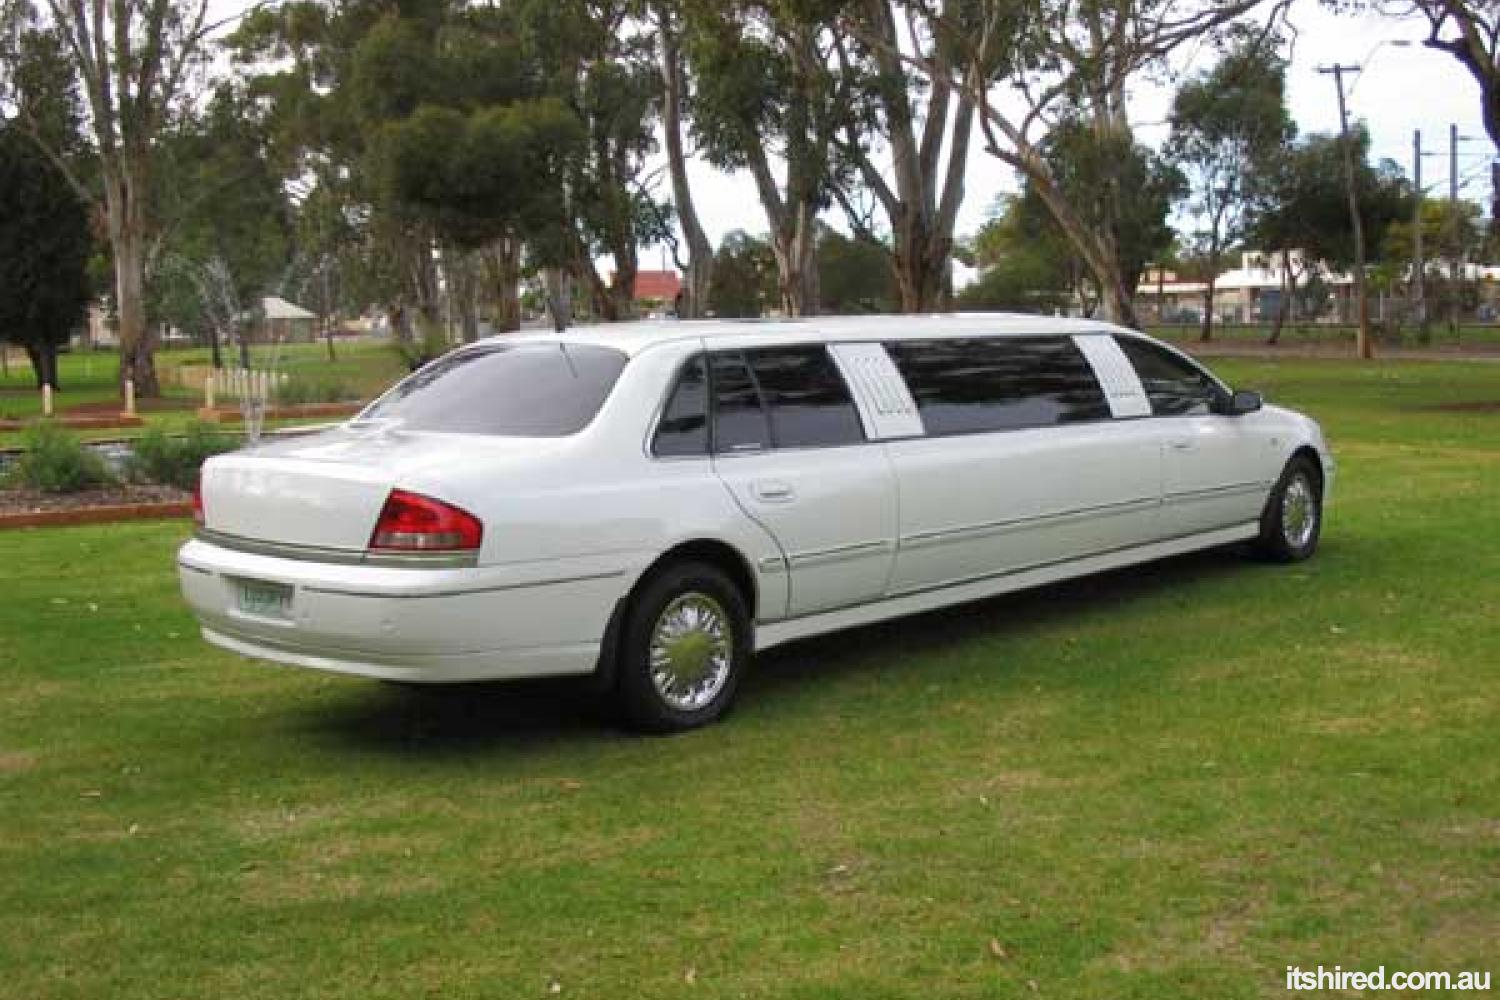 Vintage ford limo perth #10